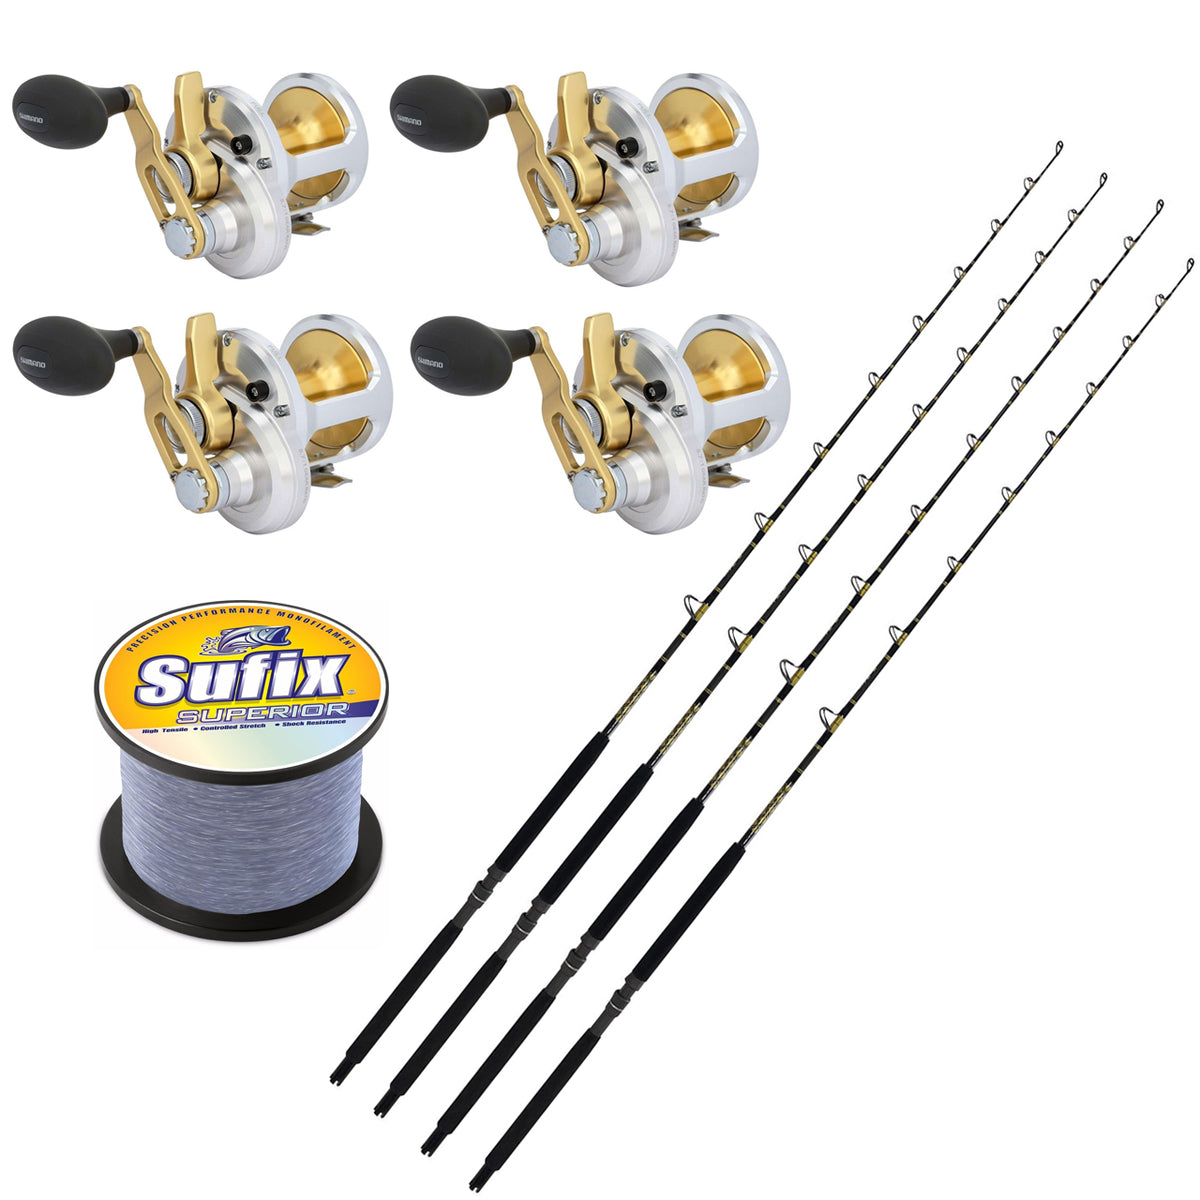 4 CHAOS KC15-30 7&#39; Live Bait Rods and 4 Shimano TALICA 16 LD Reels Spooled with SUFIX Mono